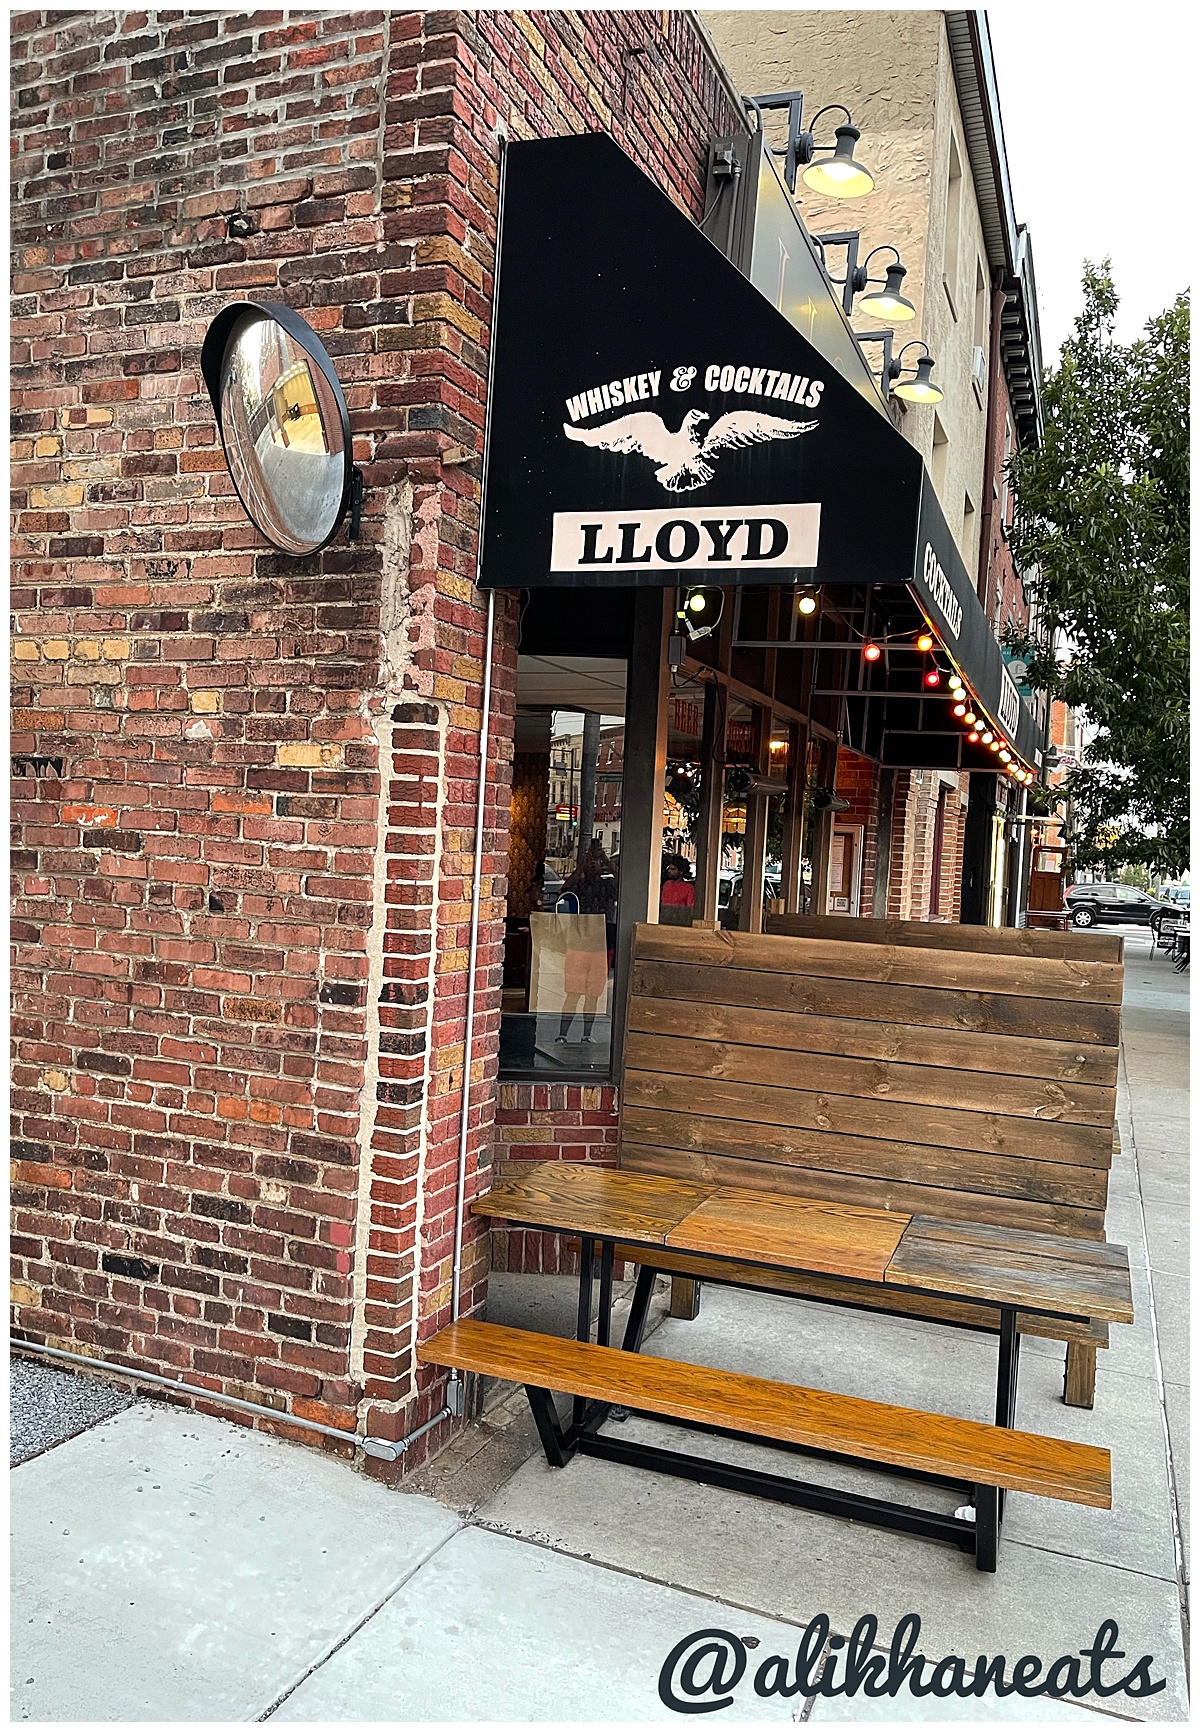 Lloyd Whiskey & Cocktails sign